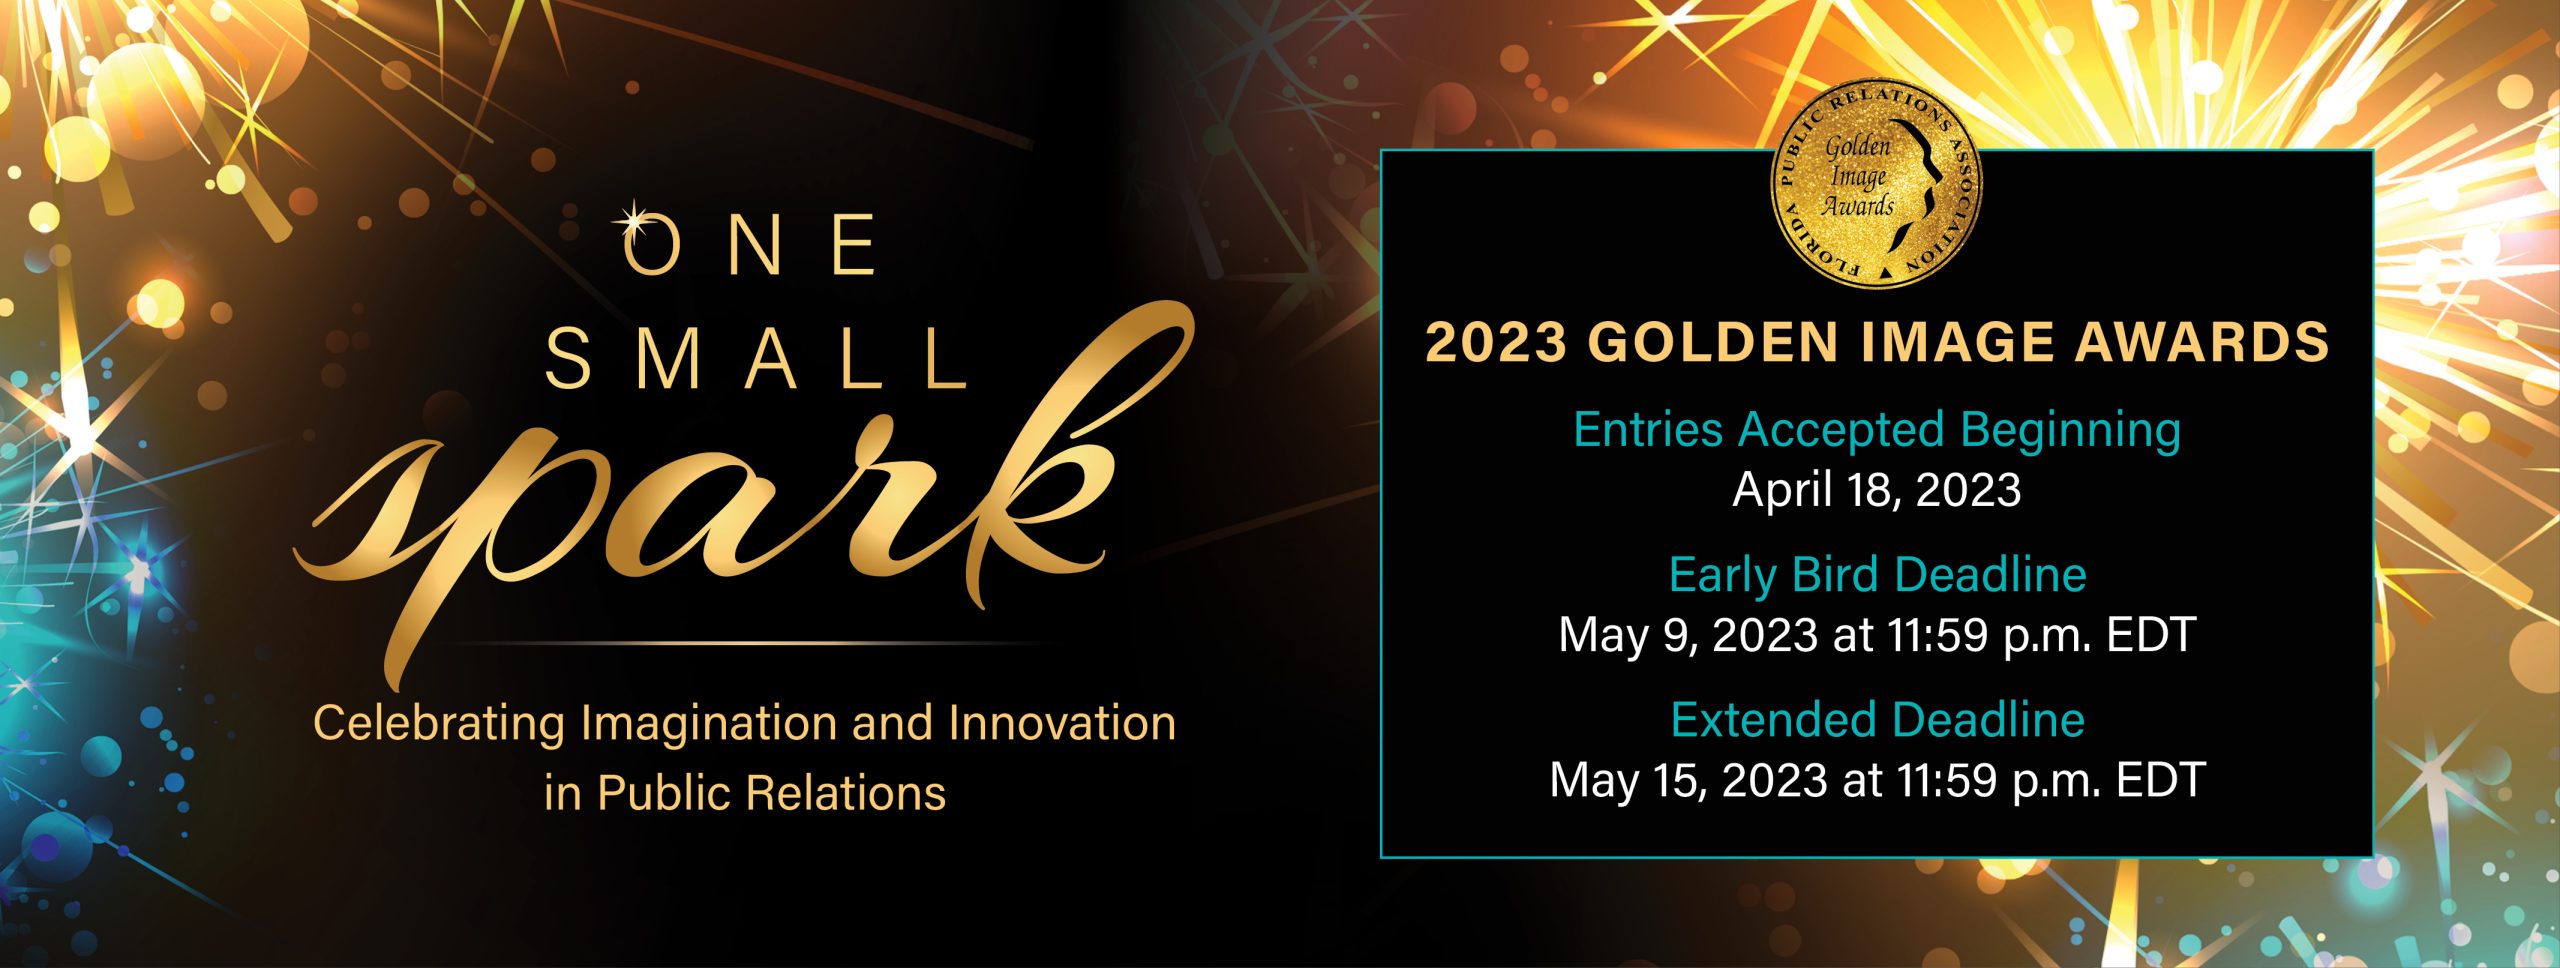 One Small Spark Golden Image banner with program dates